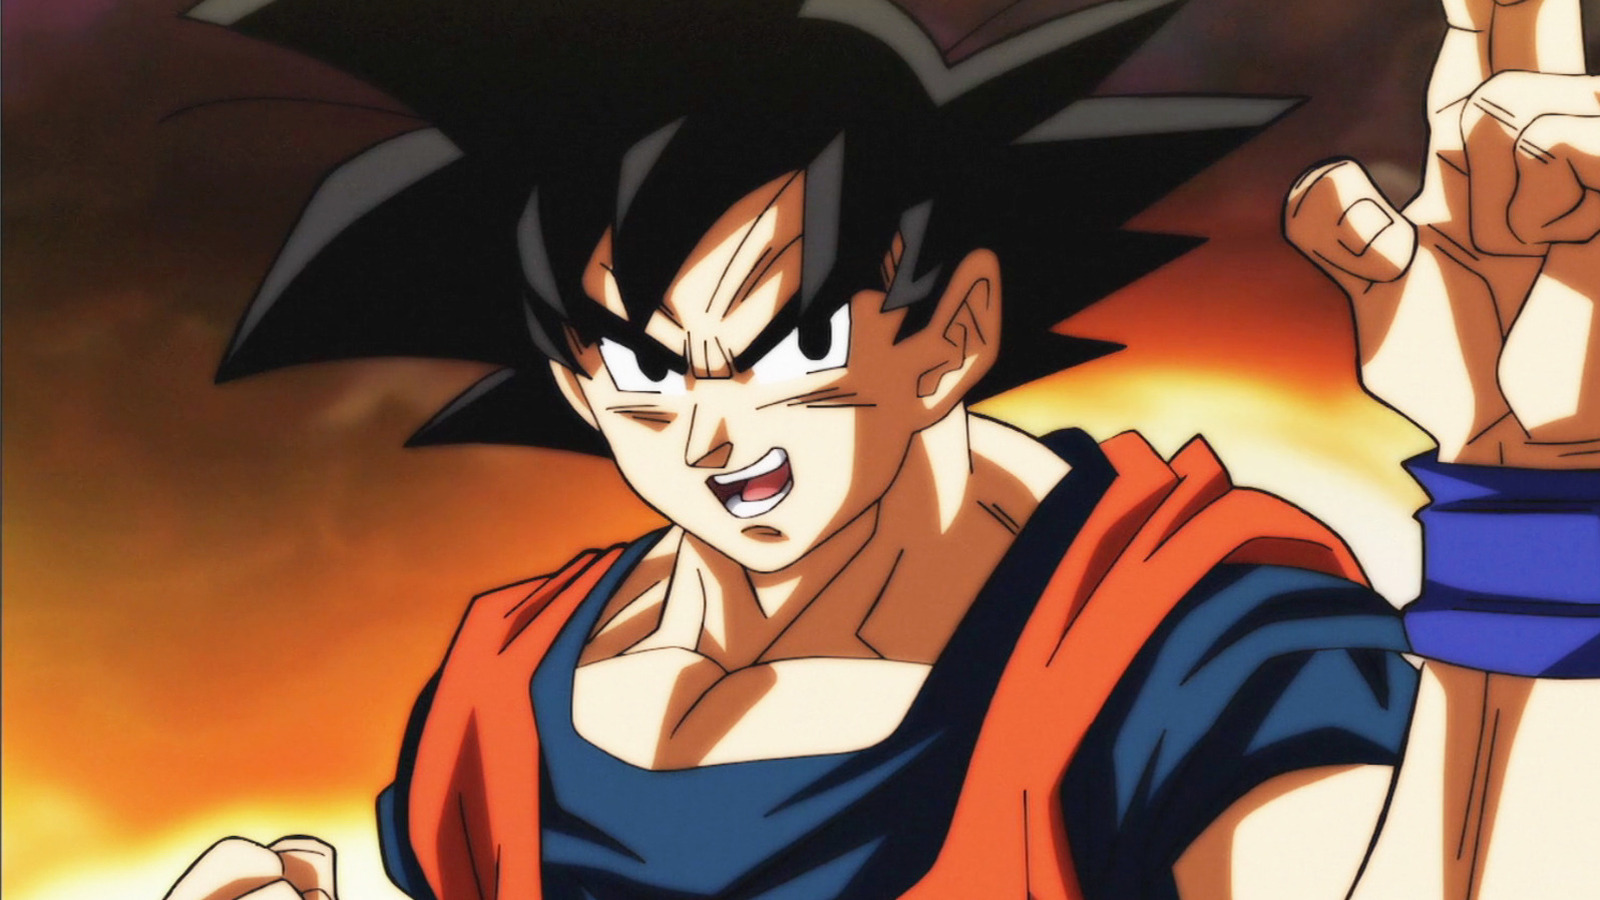 If the Dragon Ball Super Anime Returns, What Art Style Might It Use?